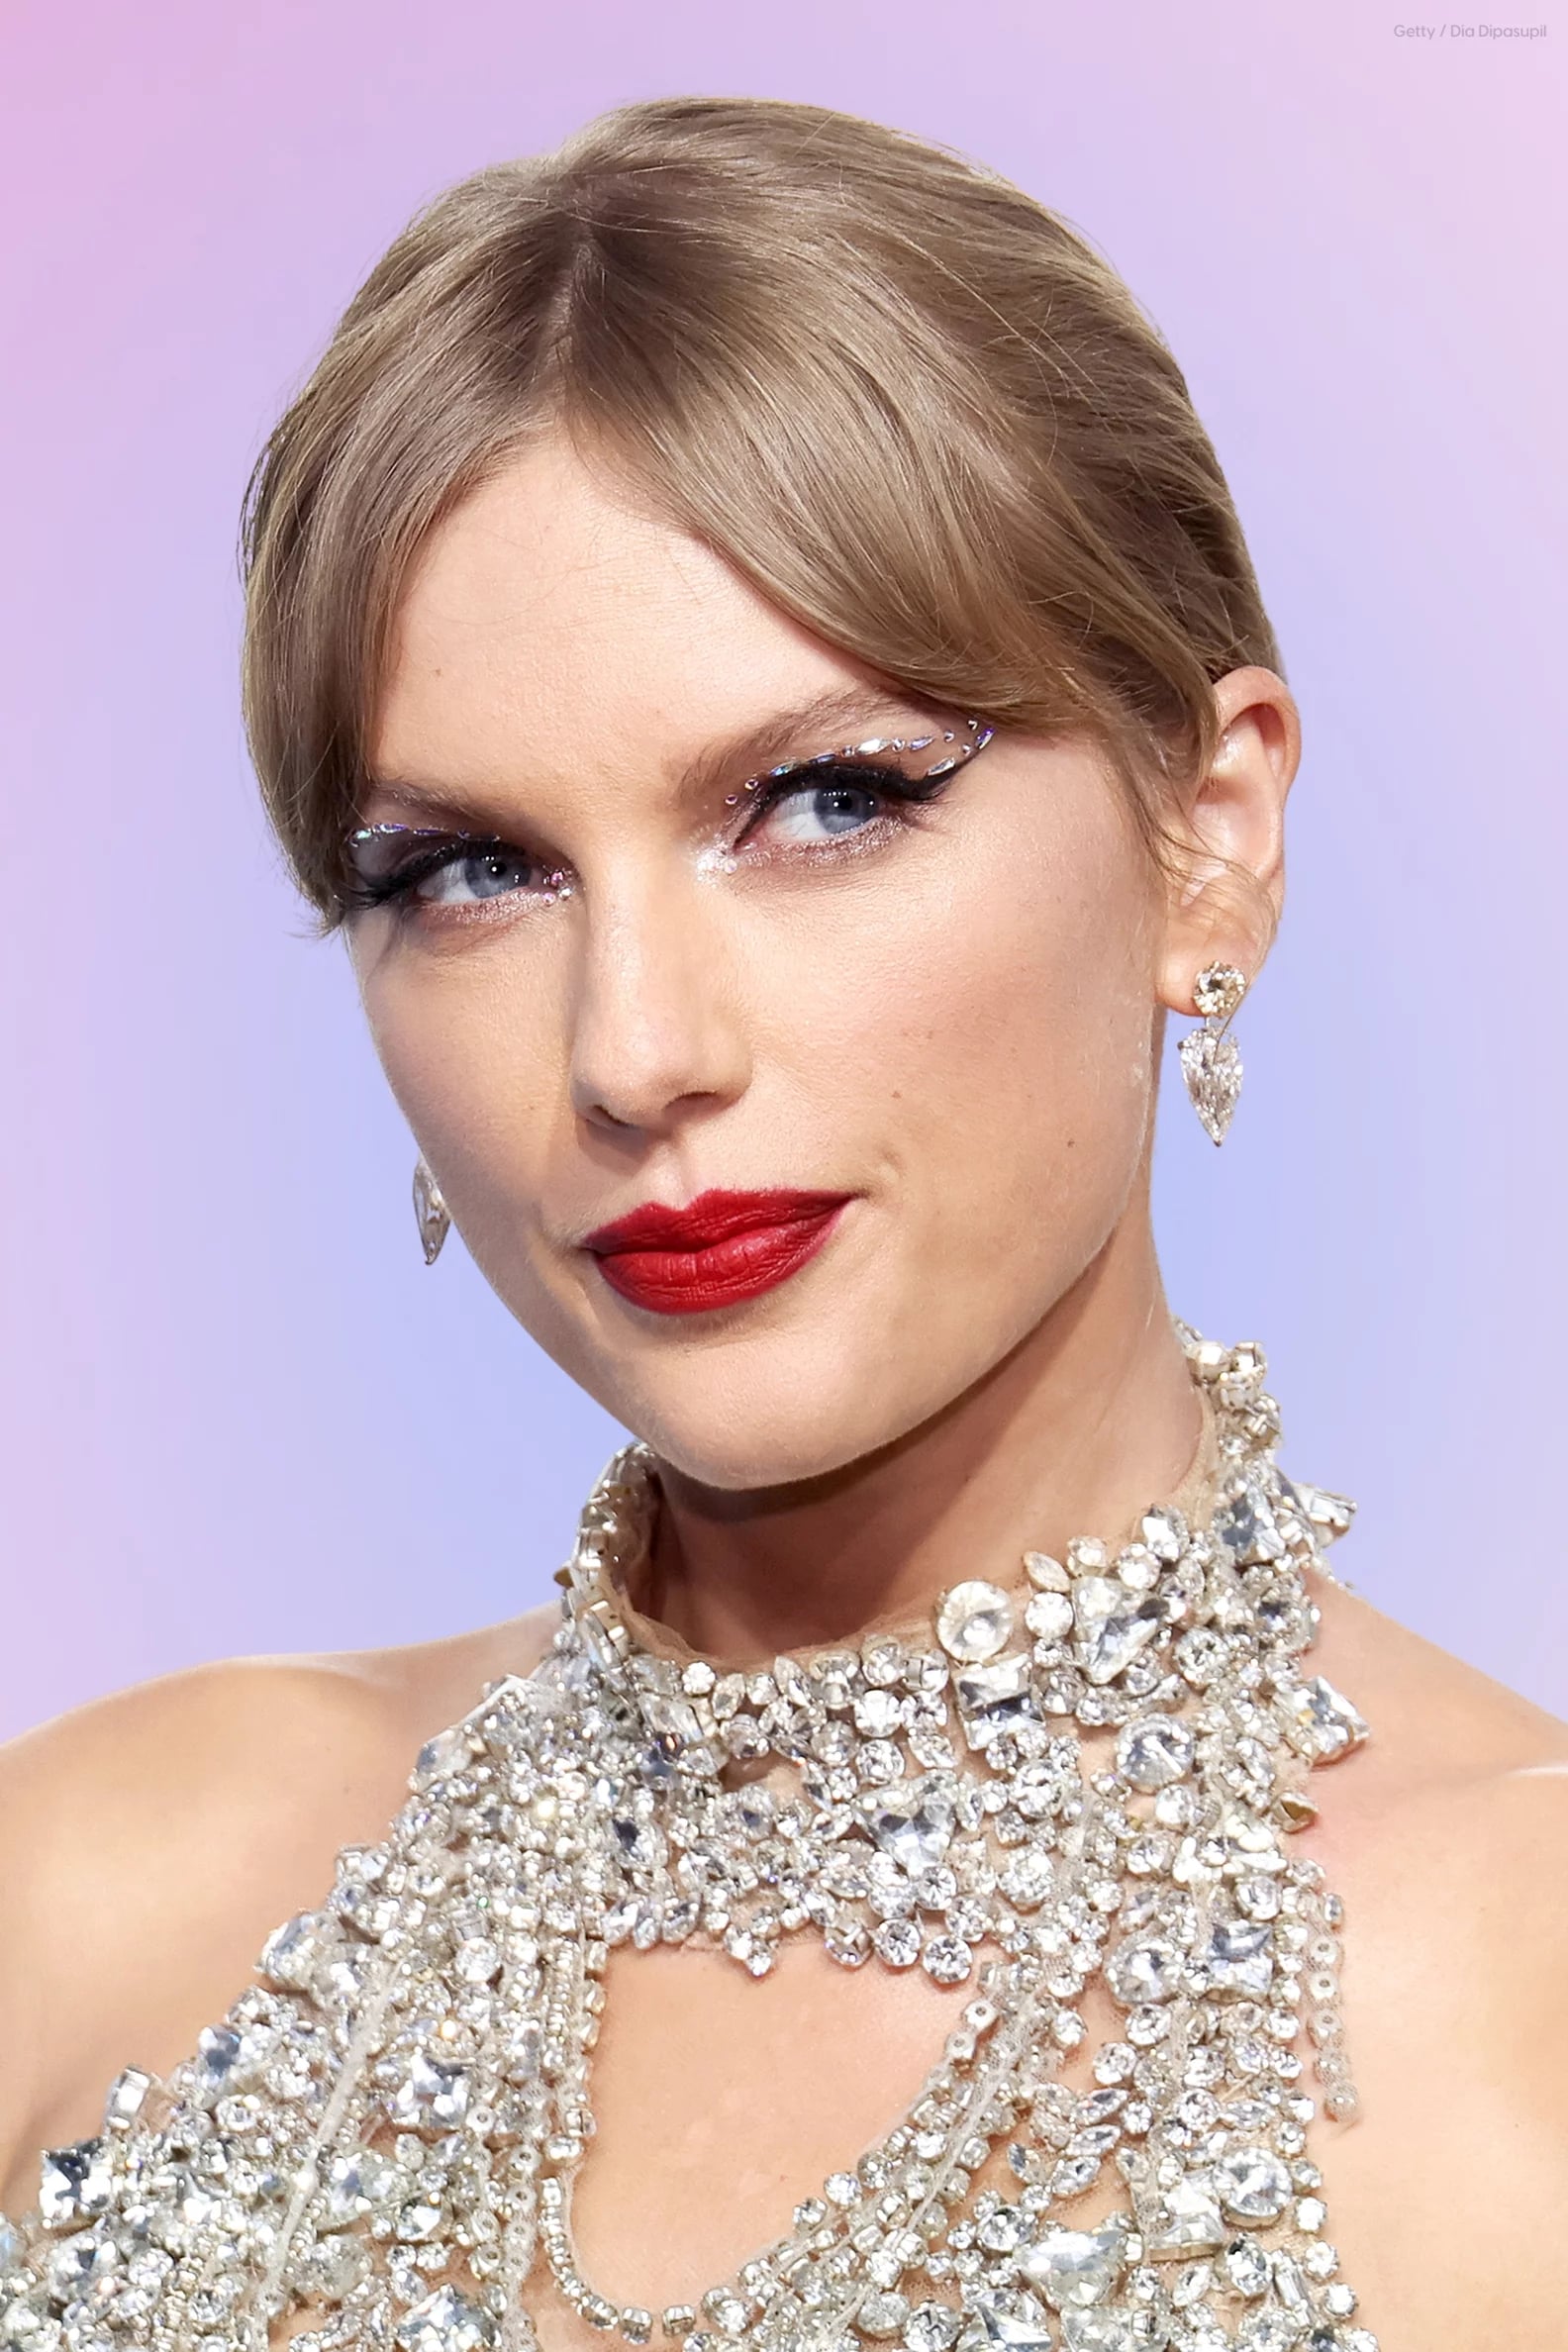 Behind Taylor Swift's dazzling make-up looks in her new 'Bejeweled